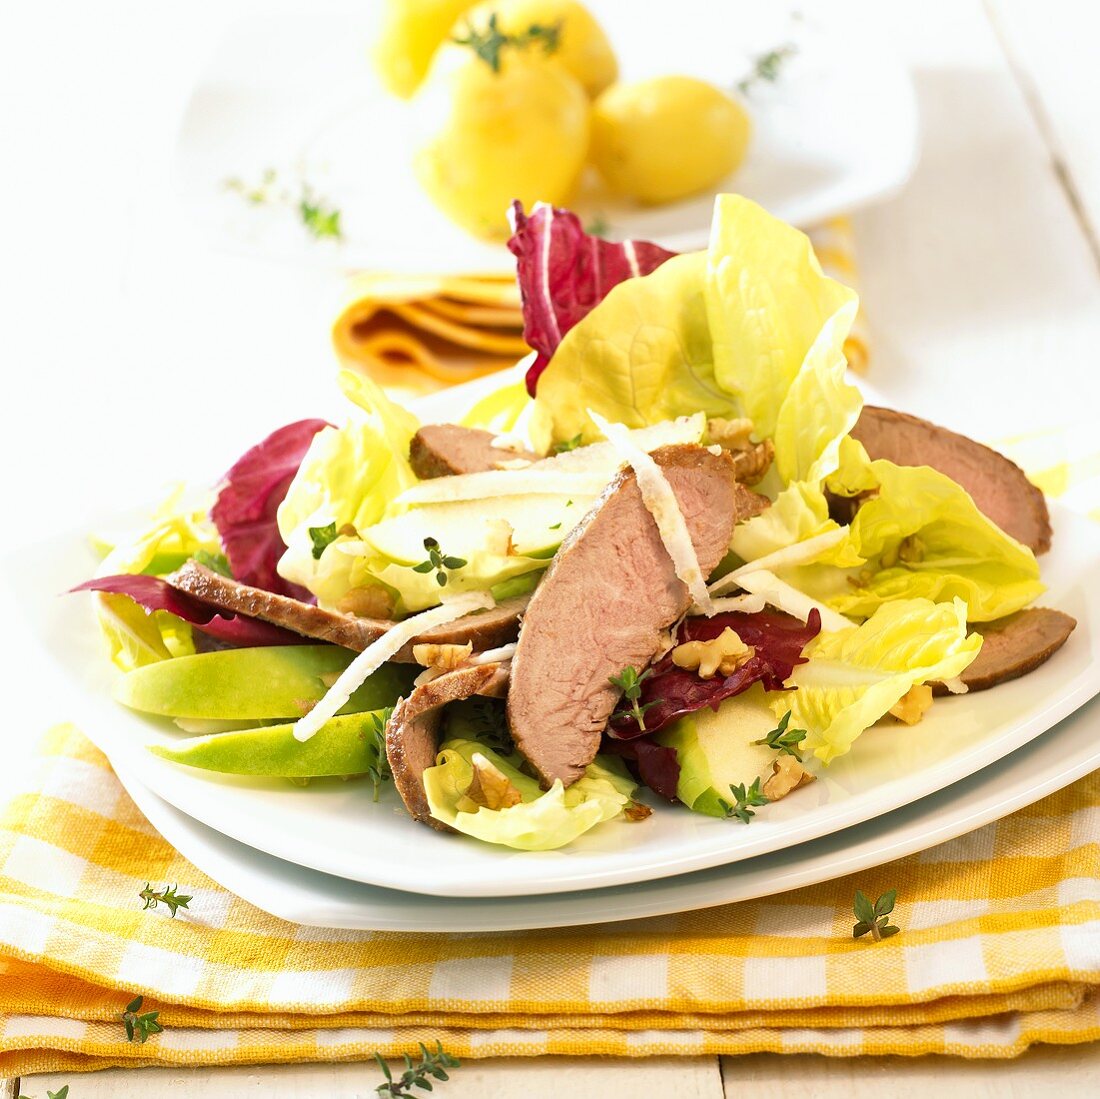 Mixed salad leaves with lamb